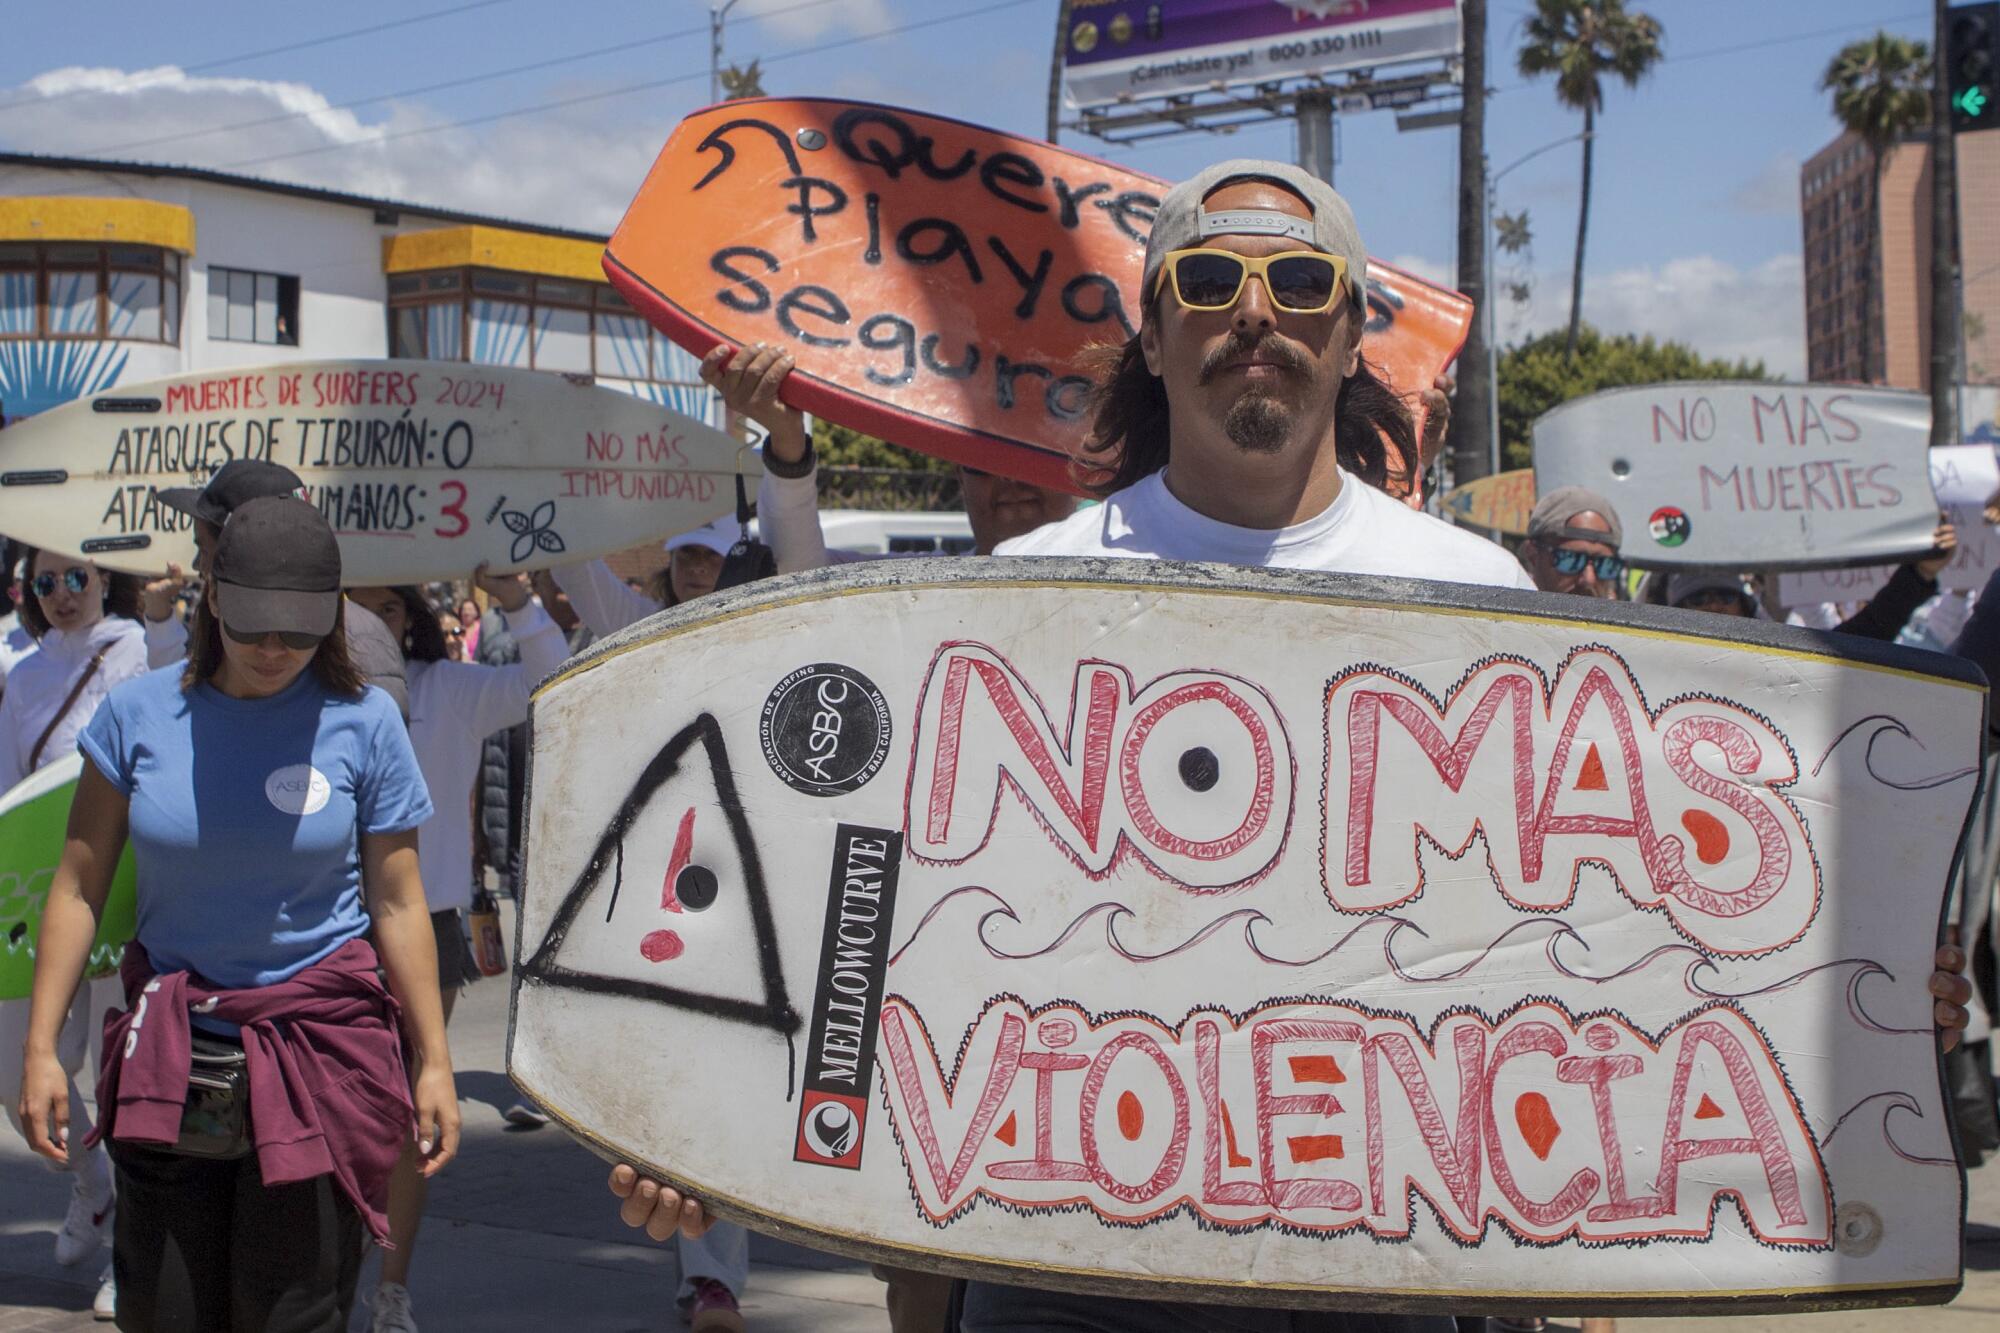 A demonstrator holding a bodyboard written in Spanish, "No more violence"